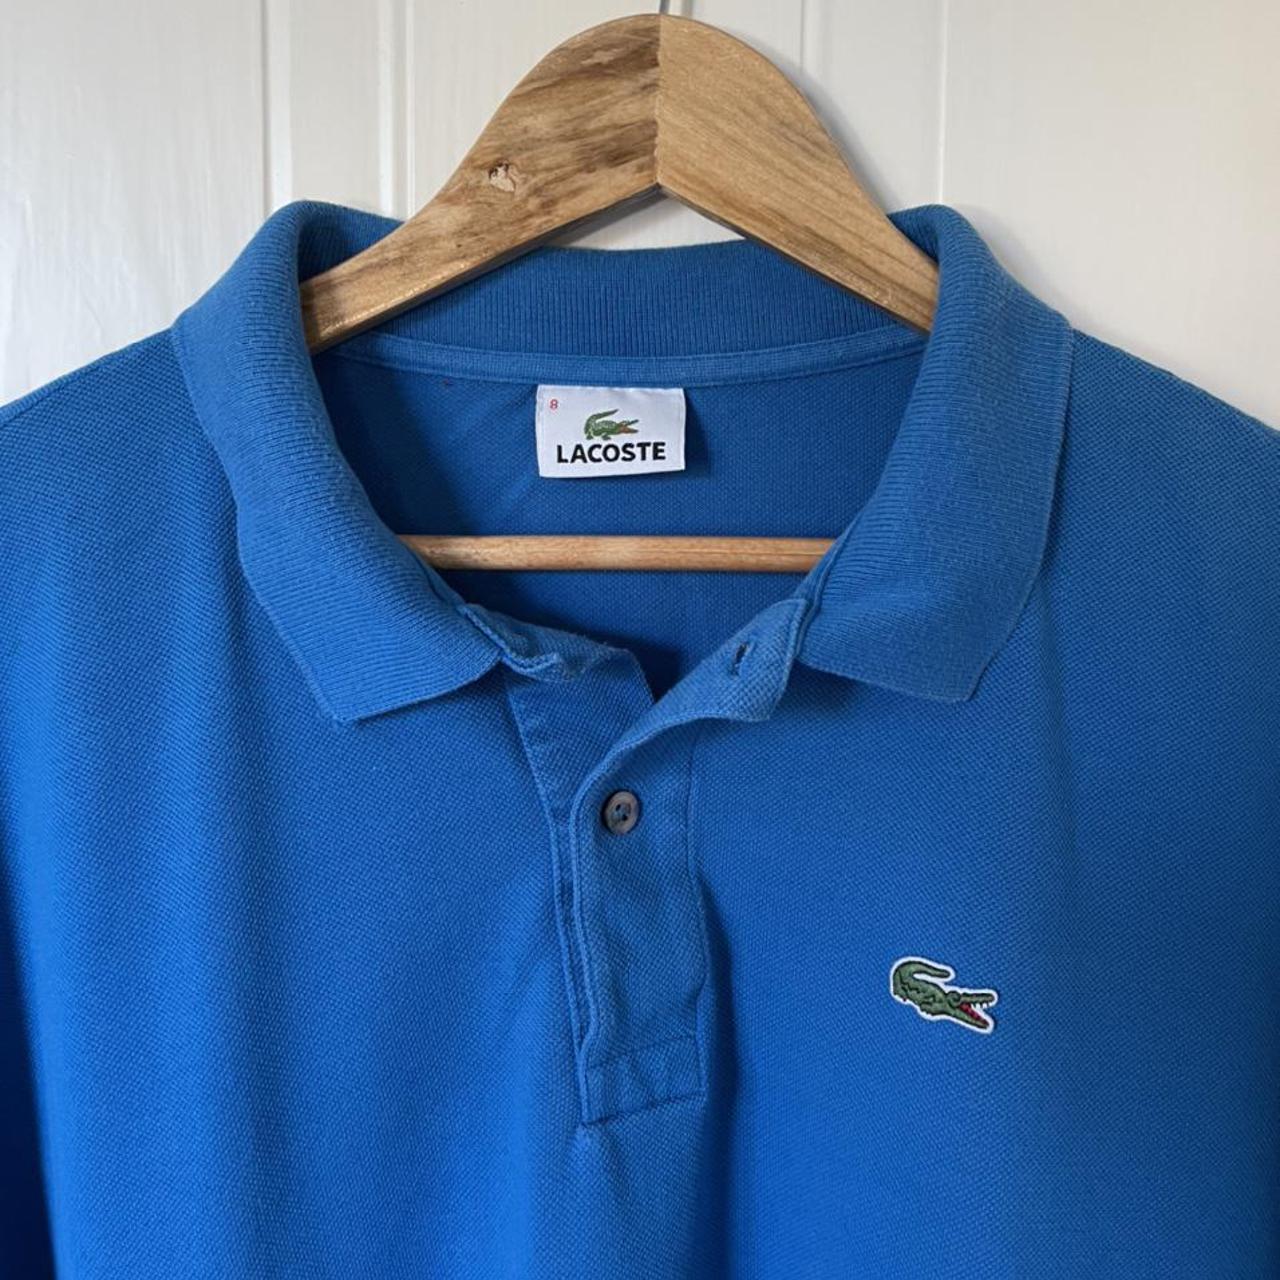 Lacoste polo shirt, royal blue colour in amazing... - Depop